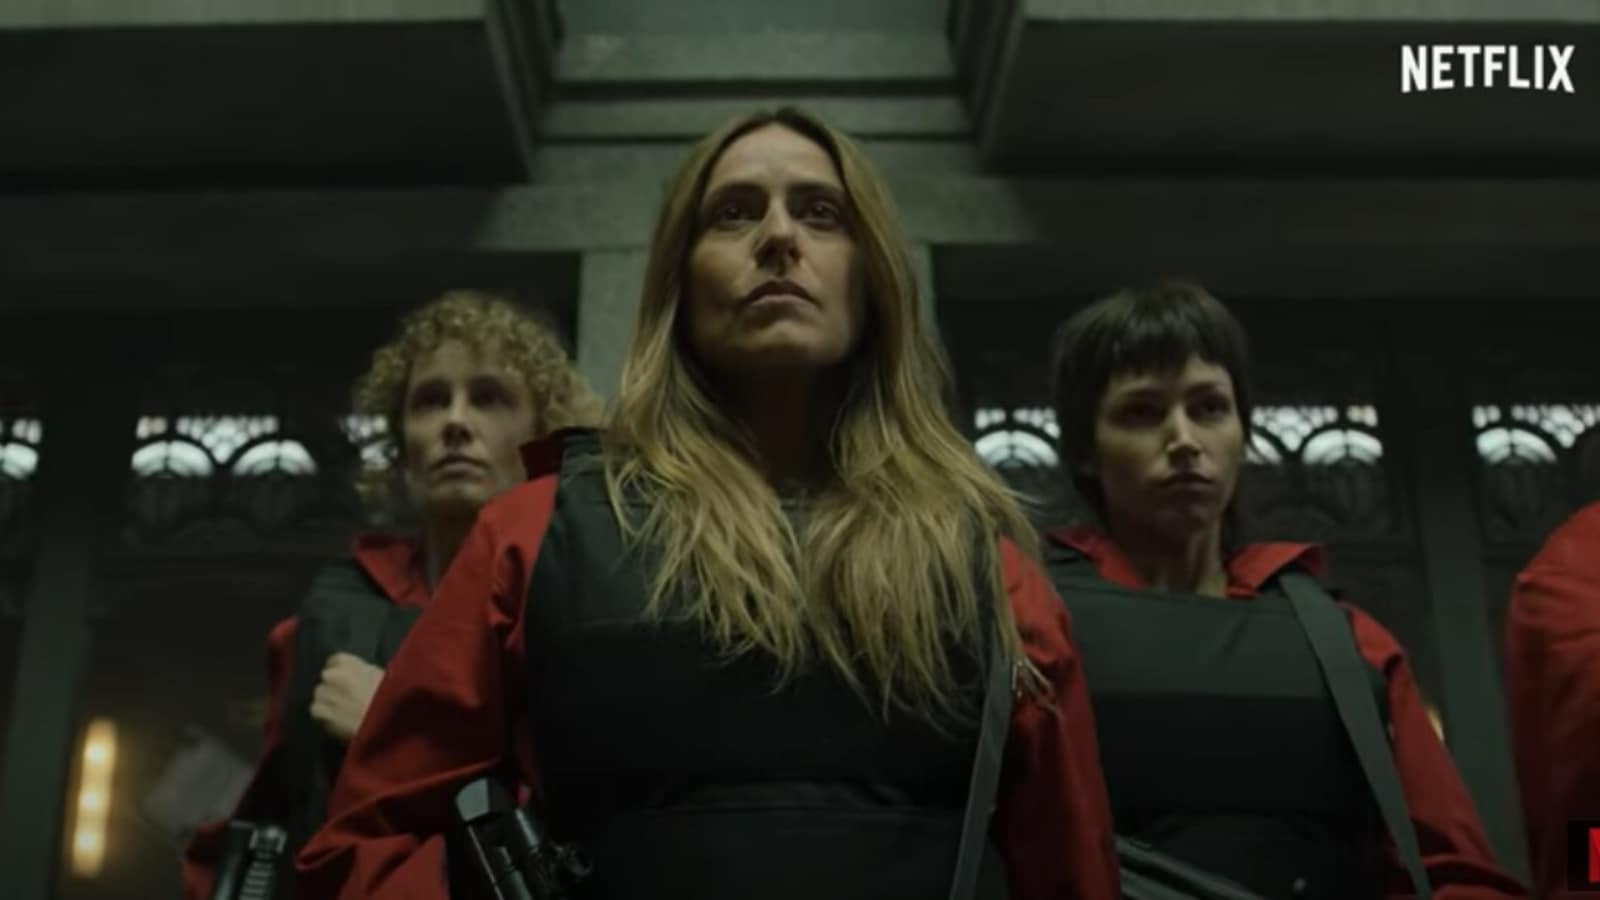 Money Heist 5 trailer: Lisbon leads Tokyo, Rio and others as Alicia traps Professor, Berlin makes a cameo | Web Series - Hindustan Times